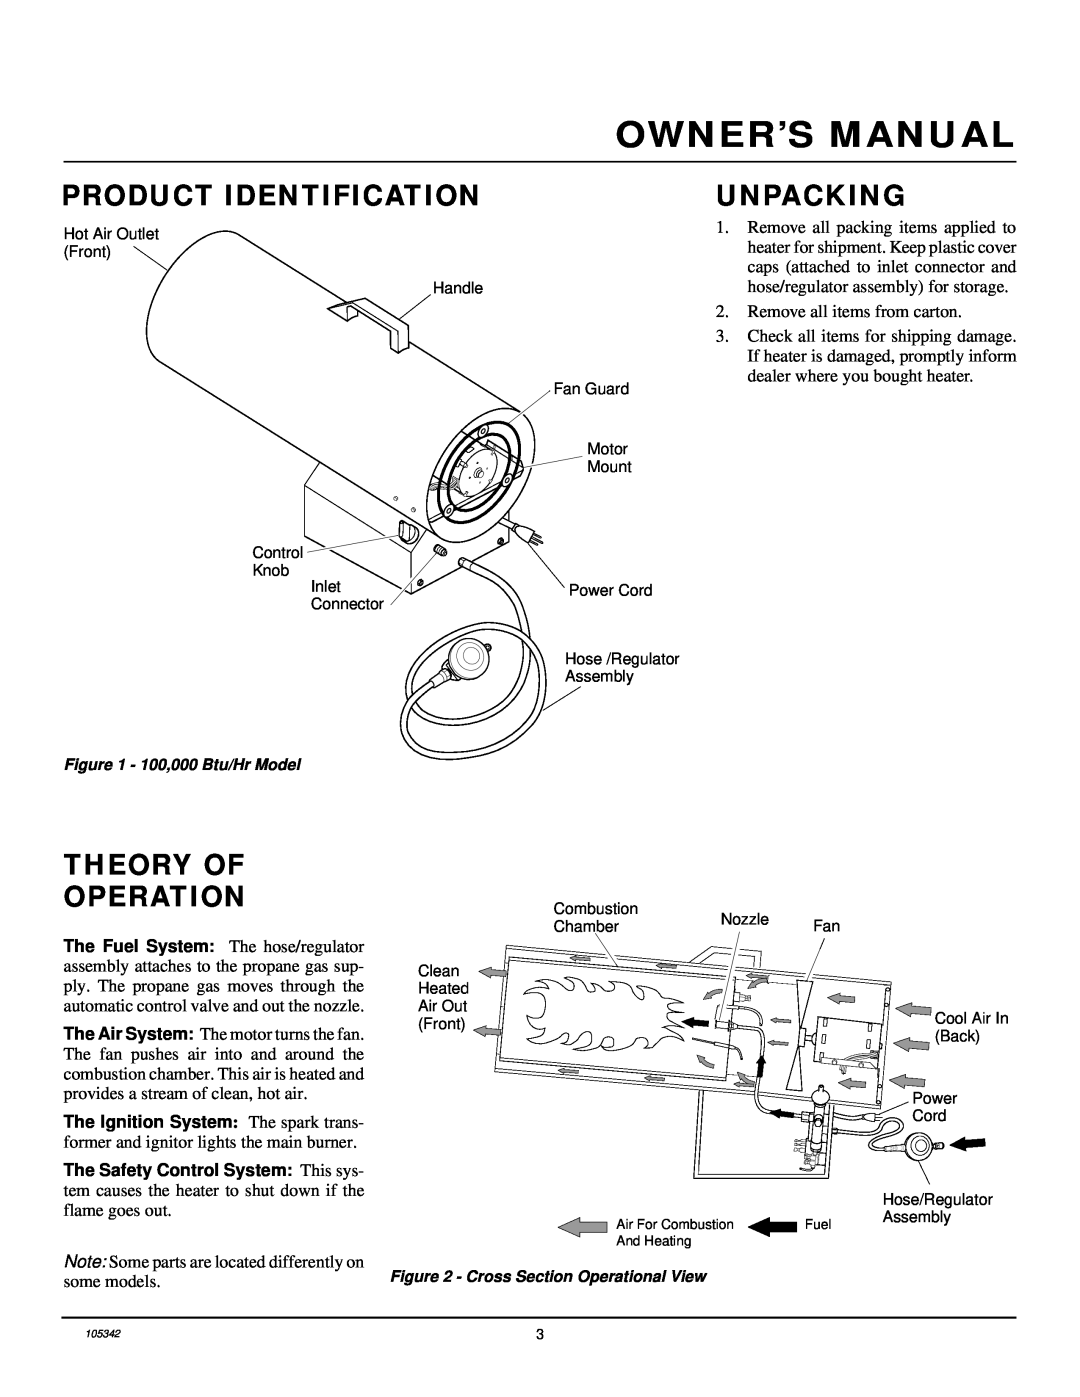 Desa RM100LP owner manual Product Identification, Unpacking, Theory Of Operation 